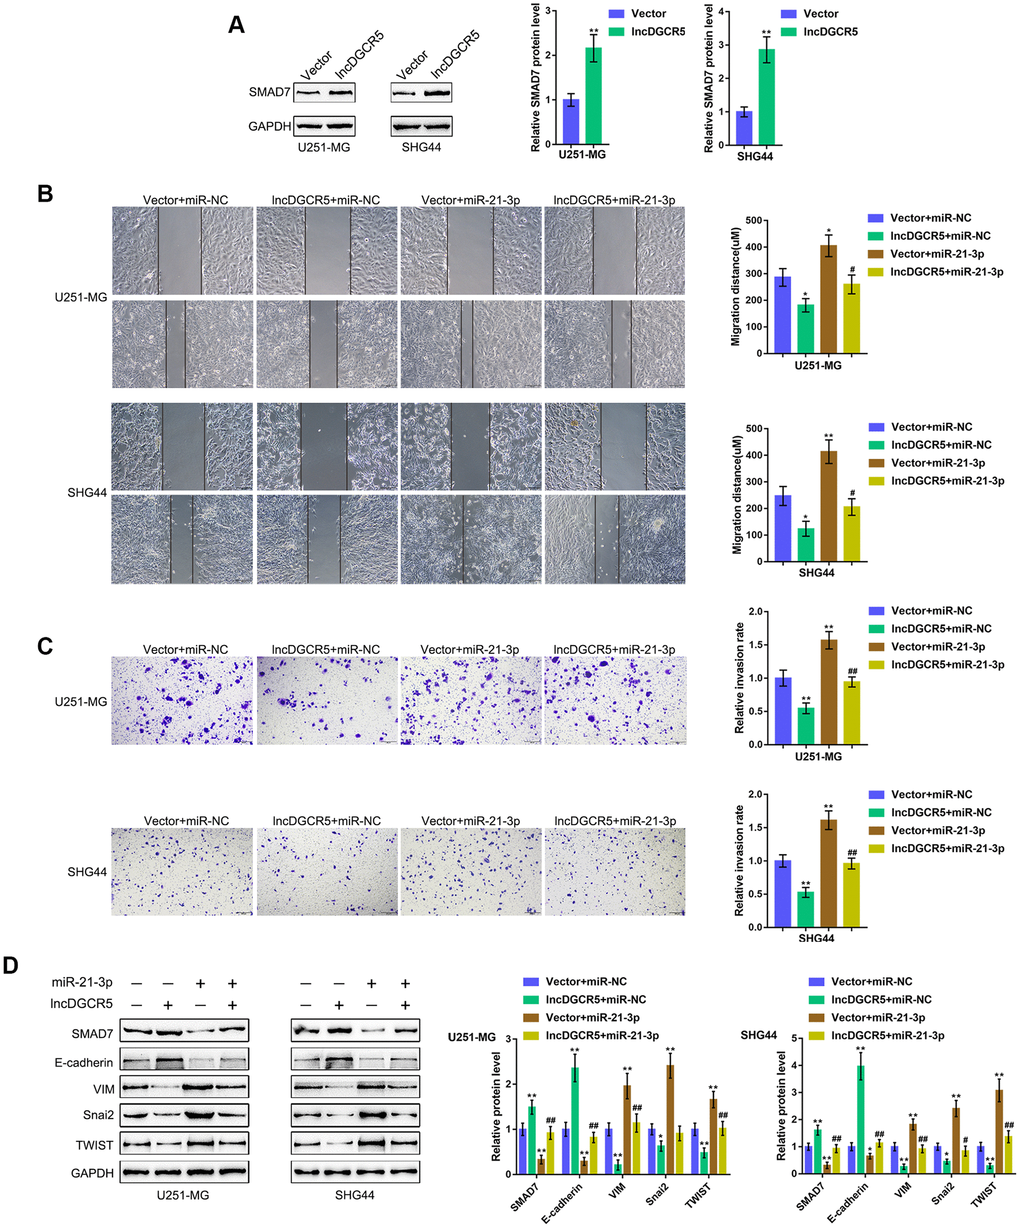 DGCR5/miR-21 axis affect glioma cell migration and invasion through Smad7. (A) U251-MG and SHG44 cells were transfected with lncRNA DGCR5-overexpressing vector and examined for the protein levels of Smad7 by immunoblotting. Next, U251-MG and SHG44 cells were co-transfected with DGCR5 and miR-21 mimic and examined for (B) migratory capacity by wound healing assay; (C) invasive capacity by Transwell assay; (D) the protein levels of Smad7, E-cadherin, VIM, Snai2, and TWIST were determined by immunoblotting. *PPPP